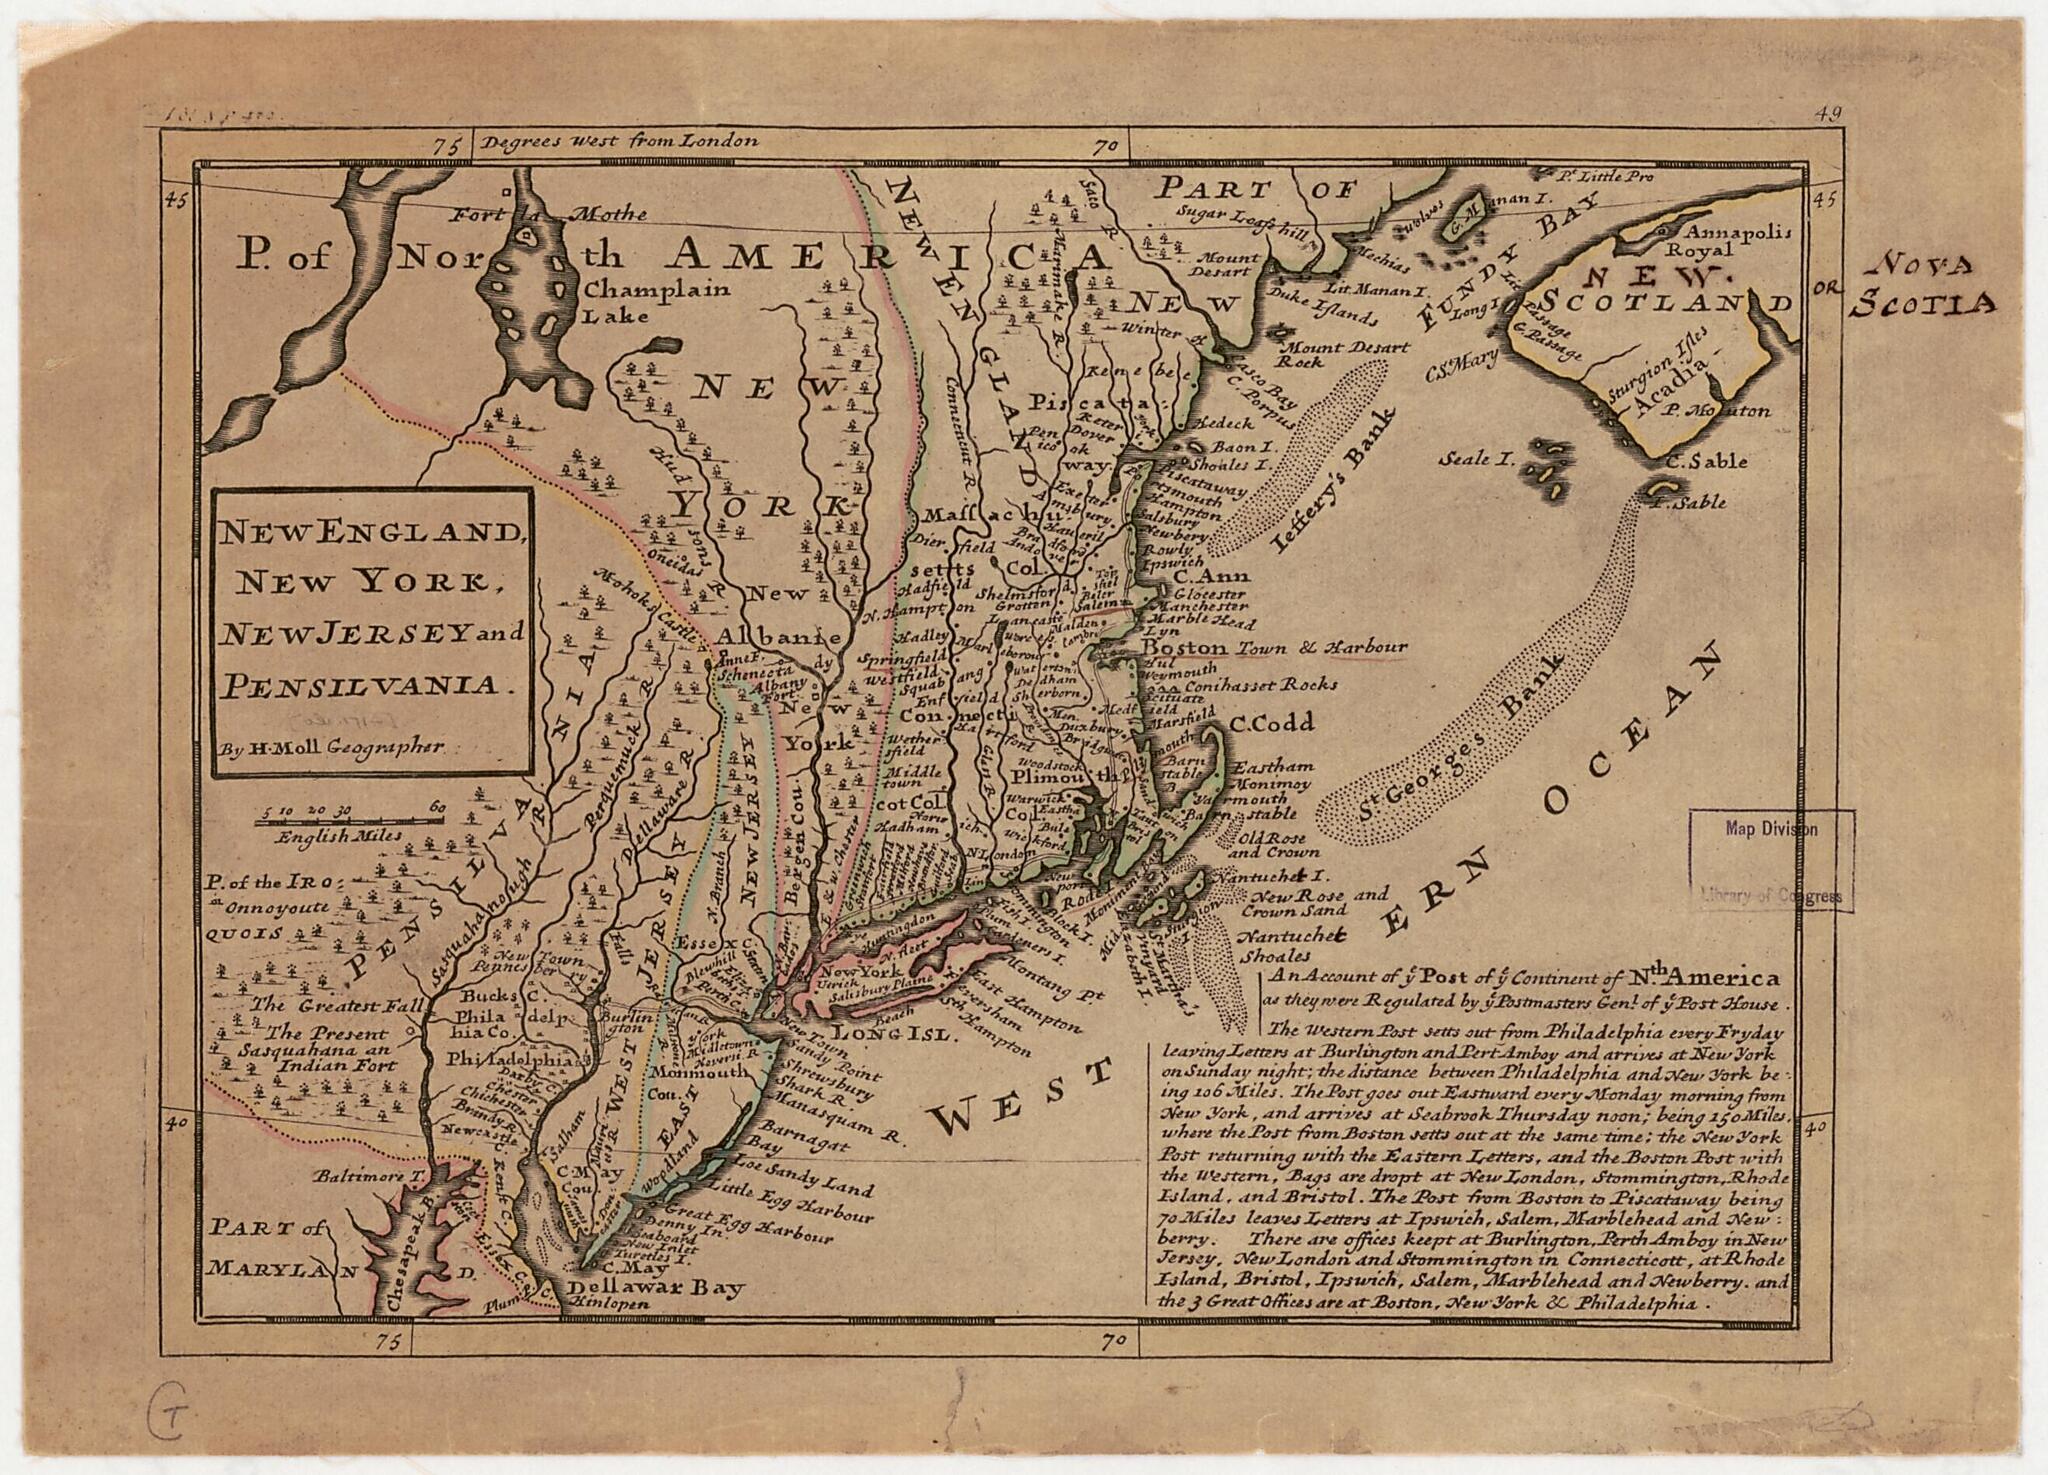 This old map of New England, New York, New Jersey and Pensilvania from 1736 was created by Herman Moll in 1736